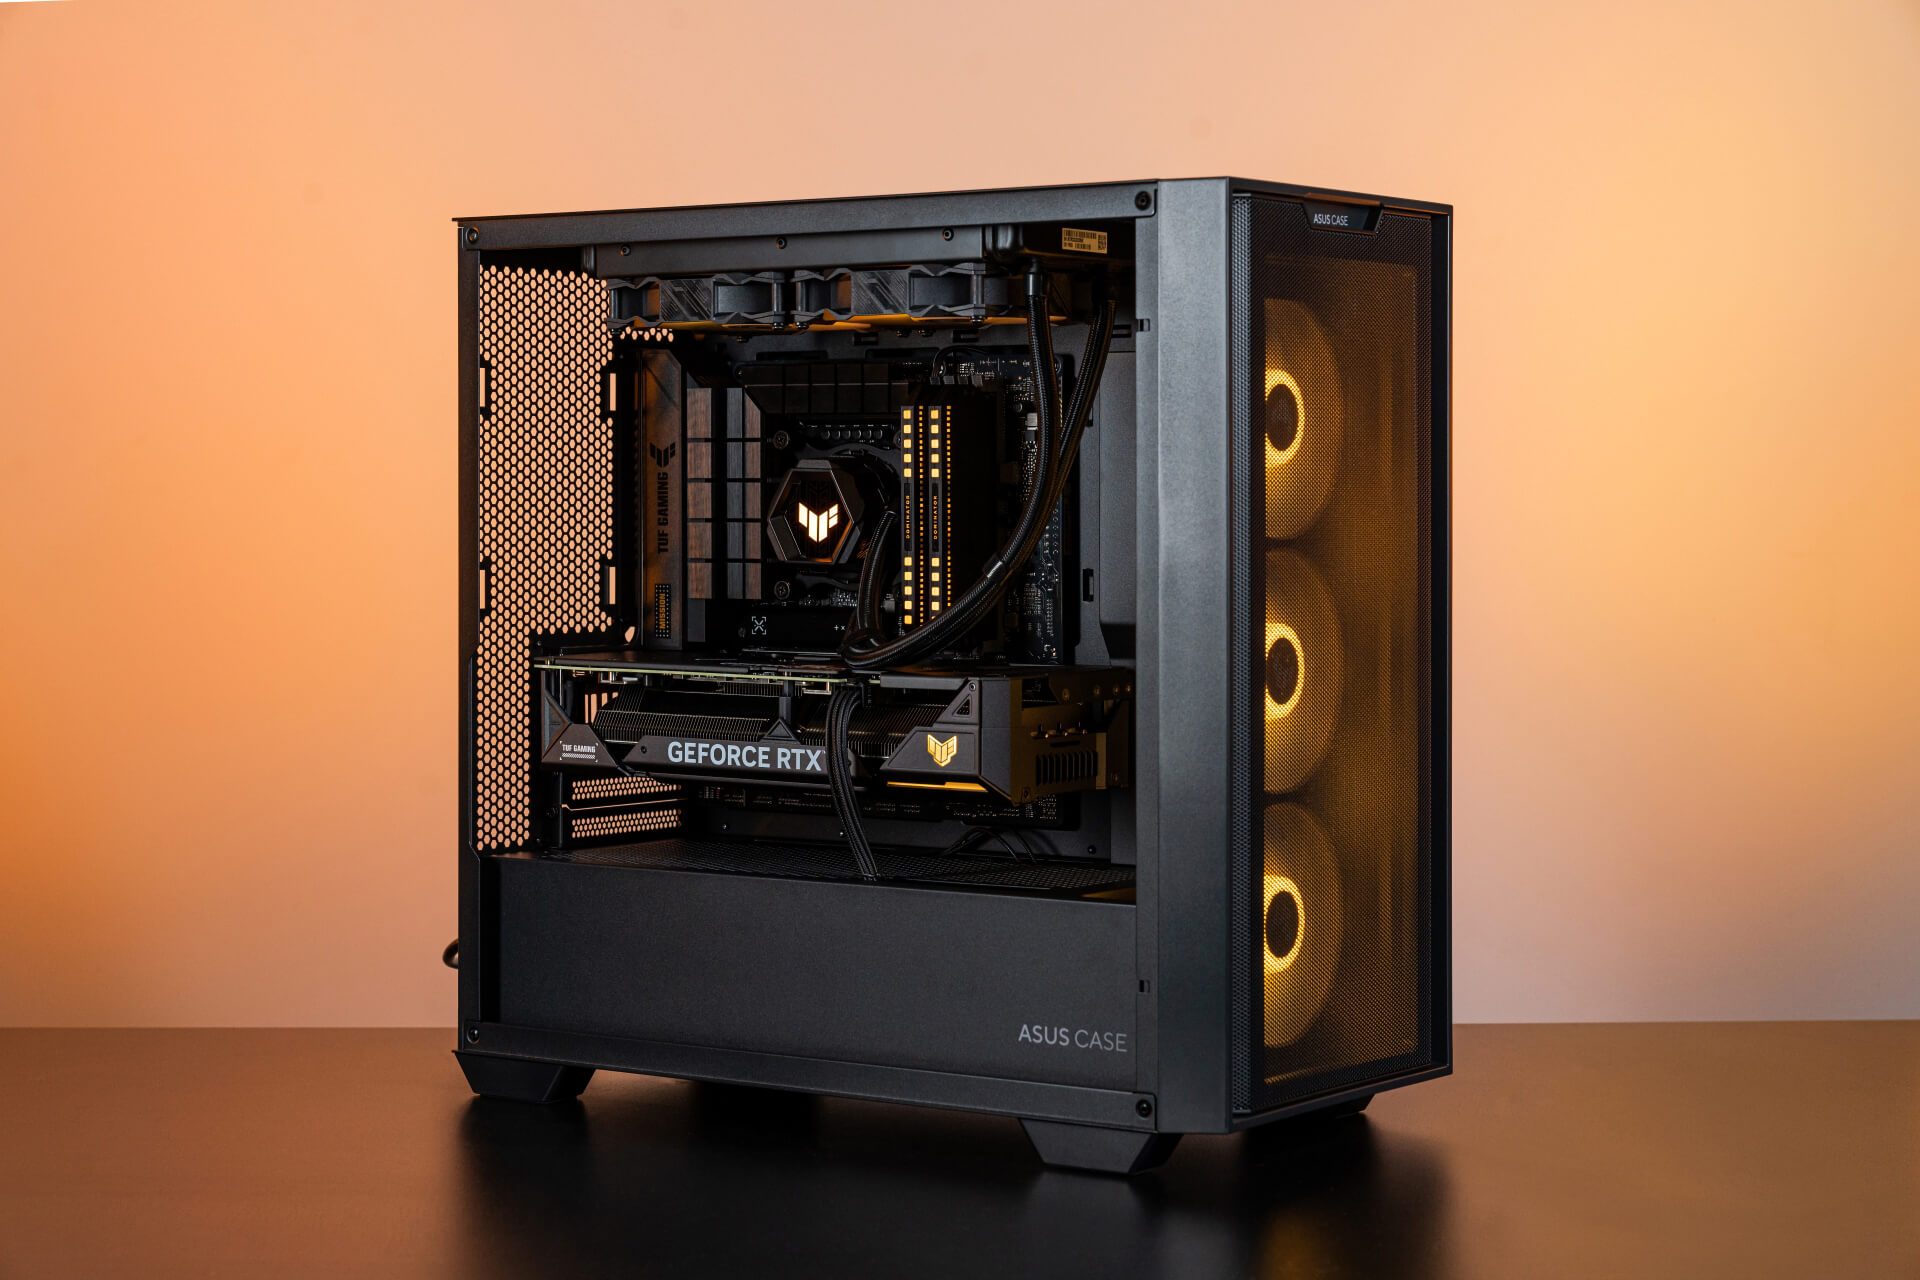 A 45˚ angle of BTF PC build with orange lighting, which shows the VGA’s power cable in the build.